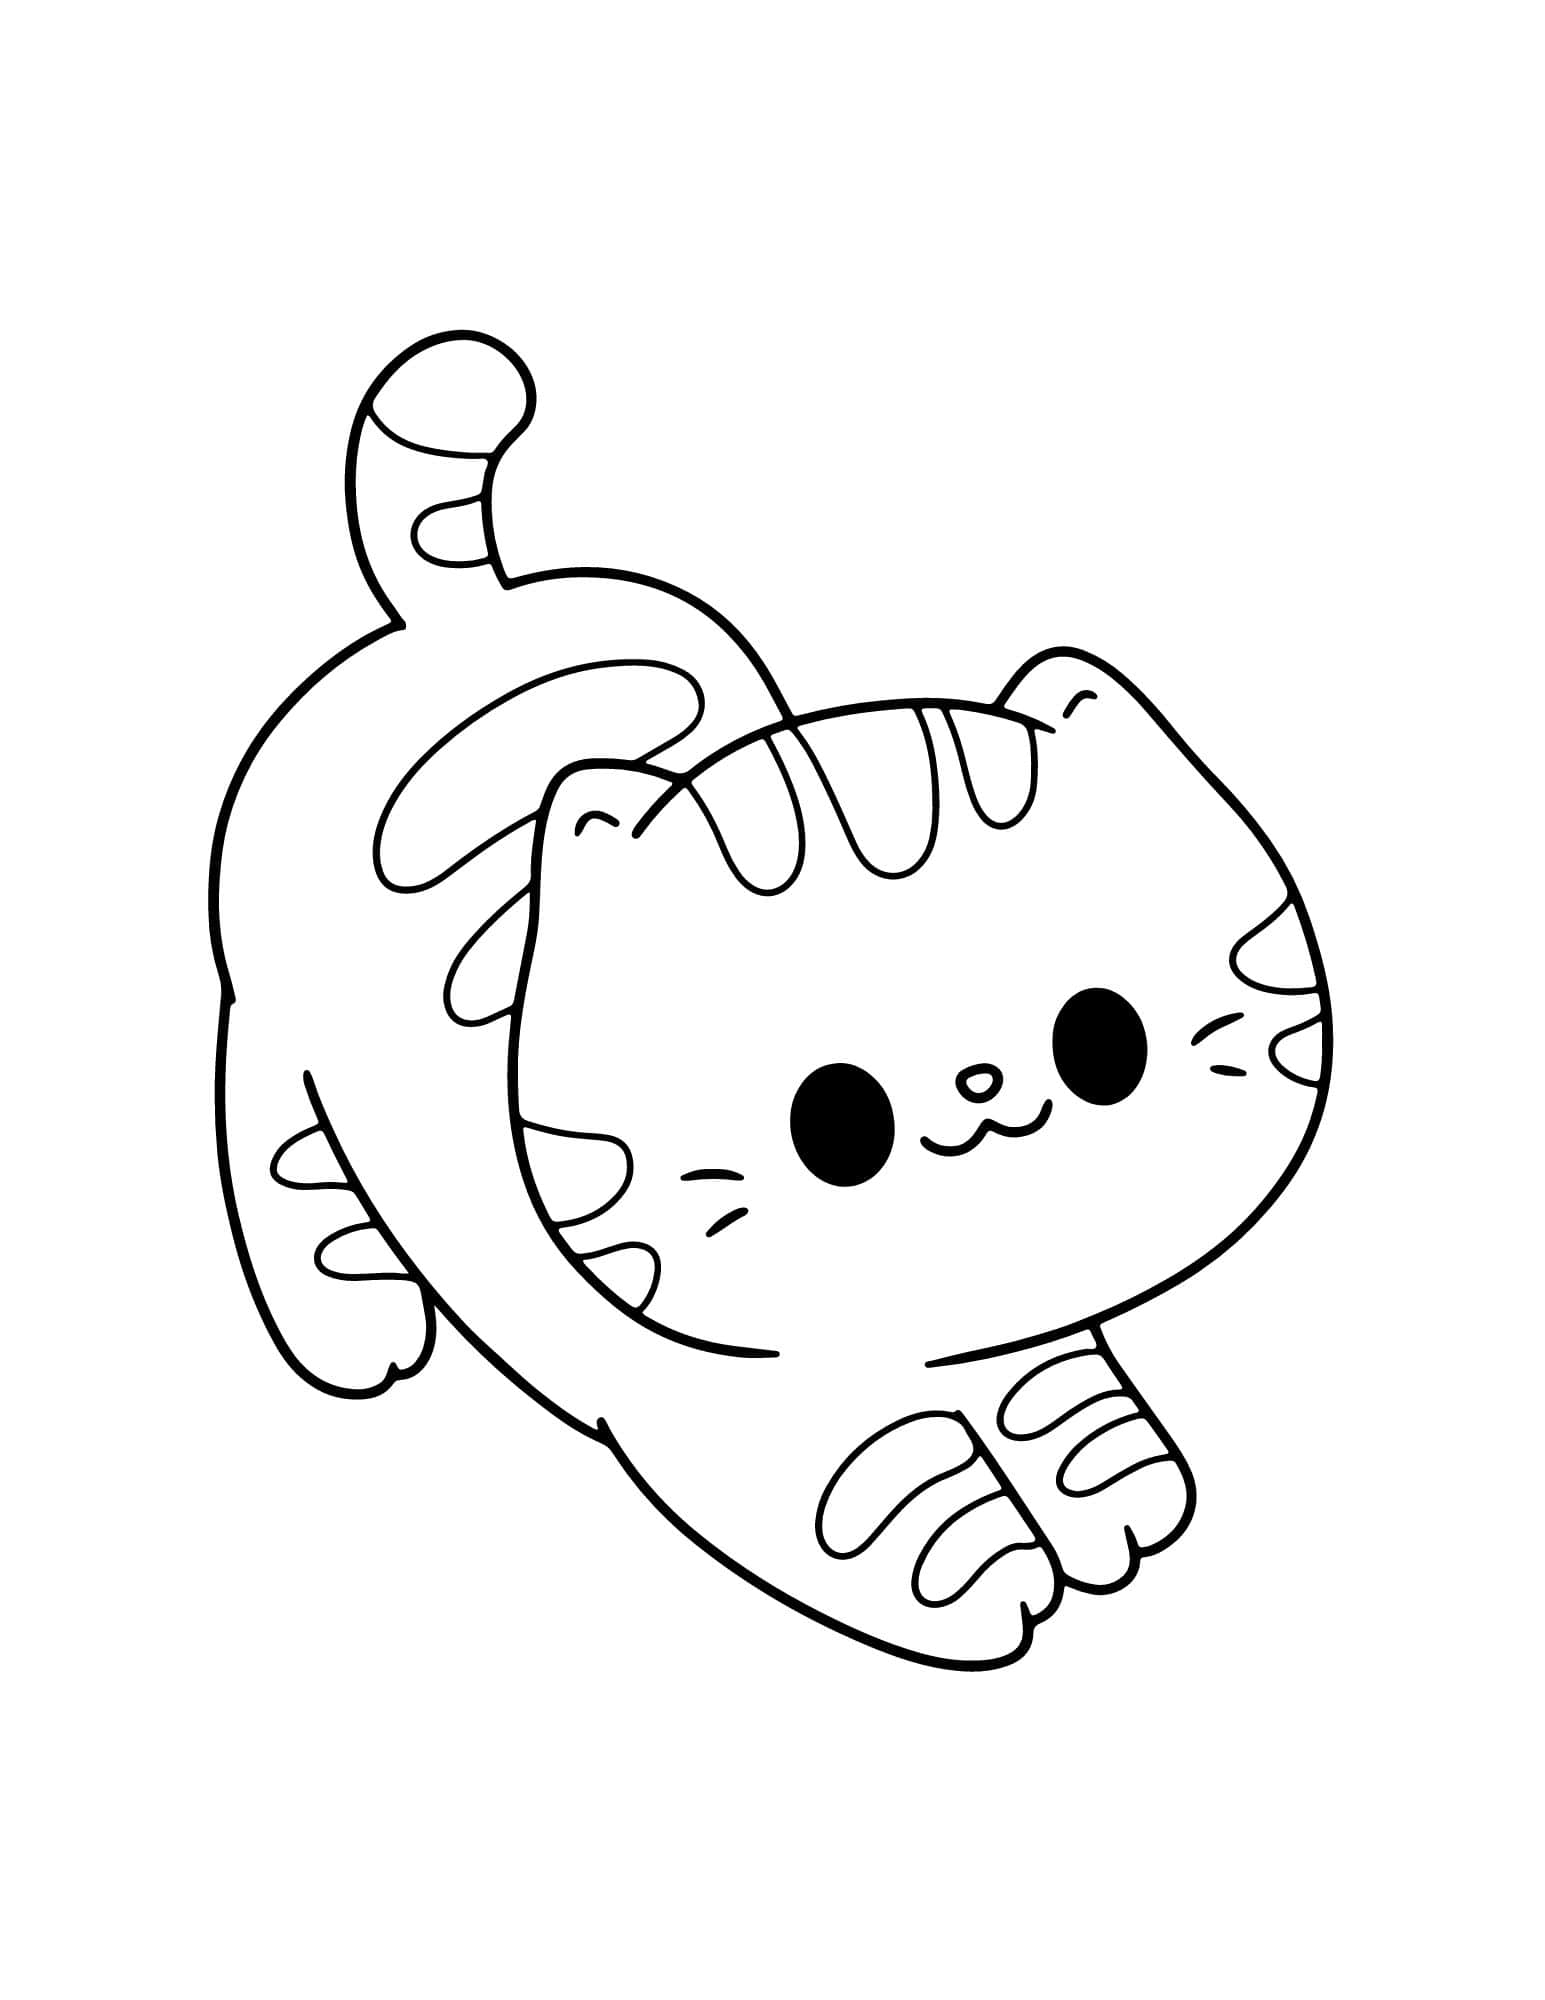 76 Cute Cat Coloring Pages For Kids and Adults - Our Mindful Life